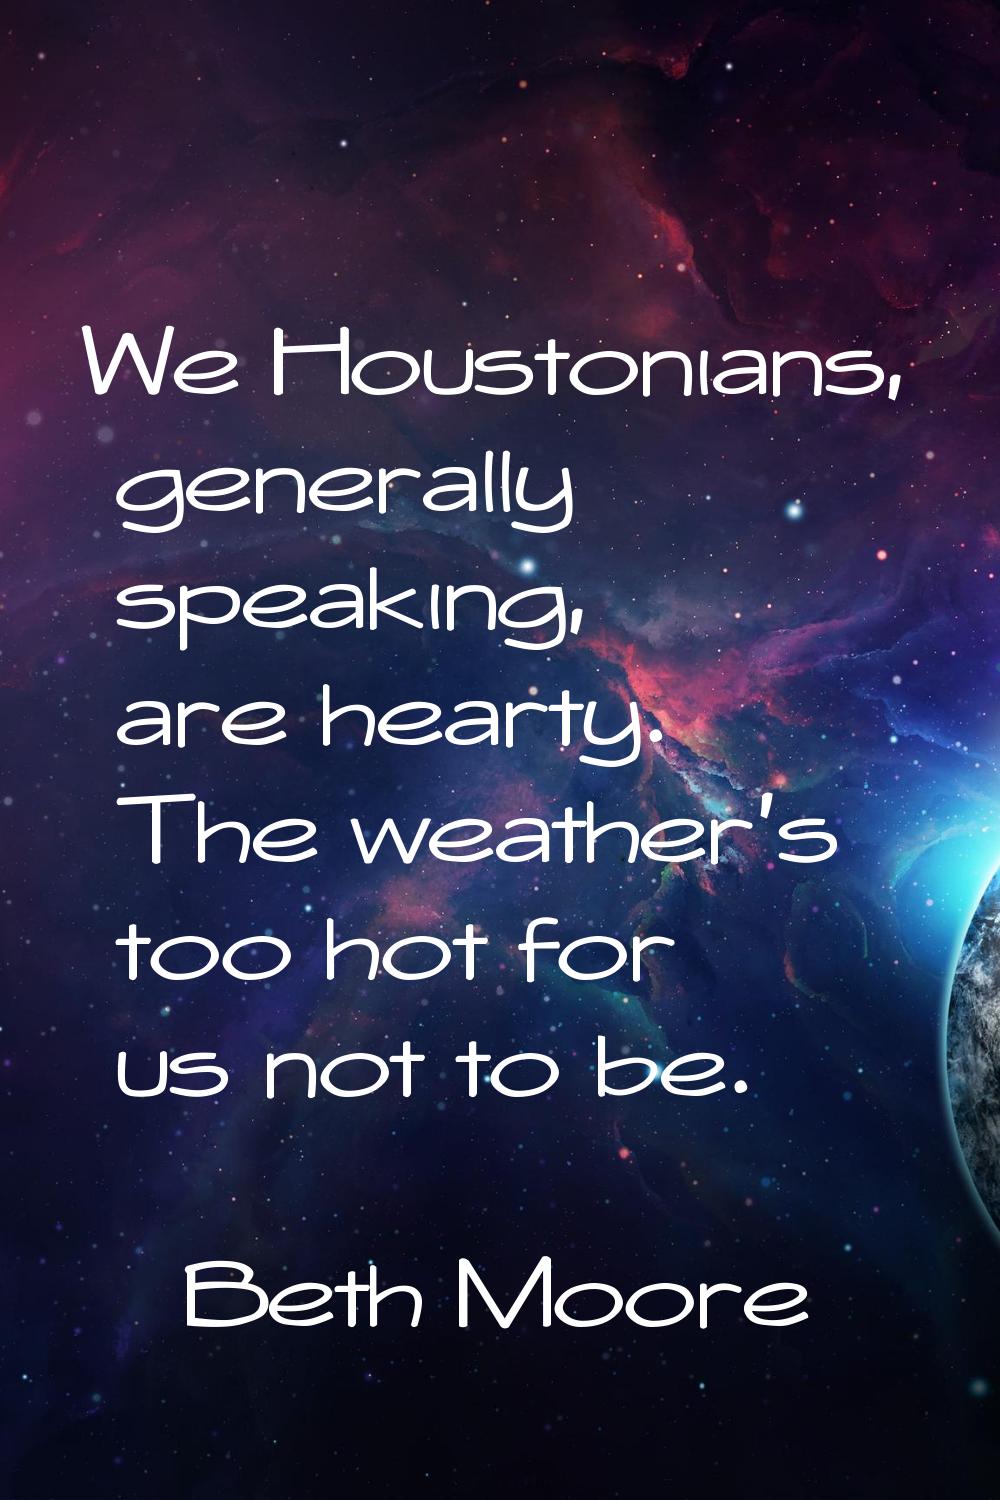 We Houstonians, generally speaking, are hearty. The weather's too hot for us not to be.